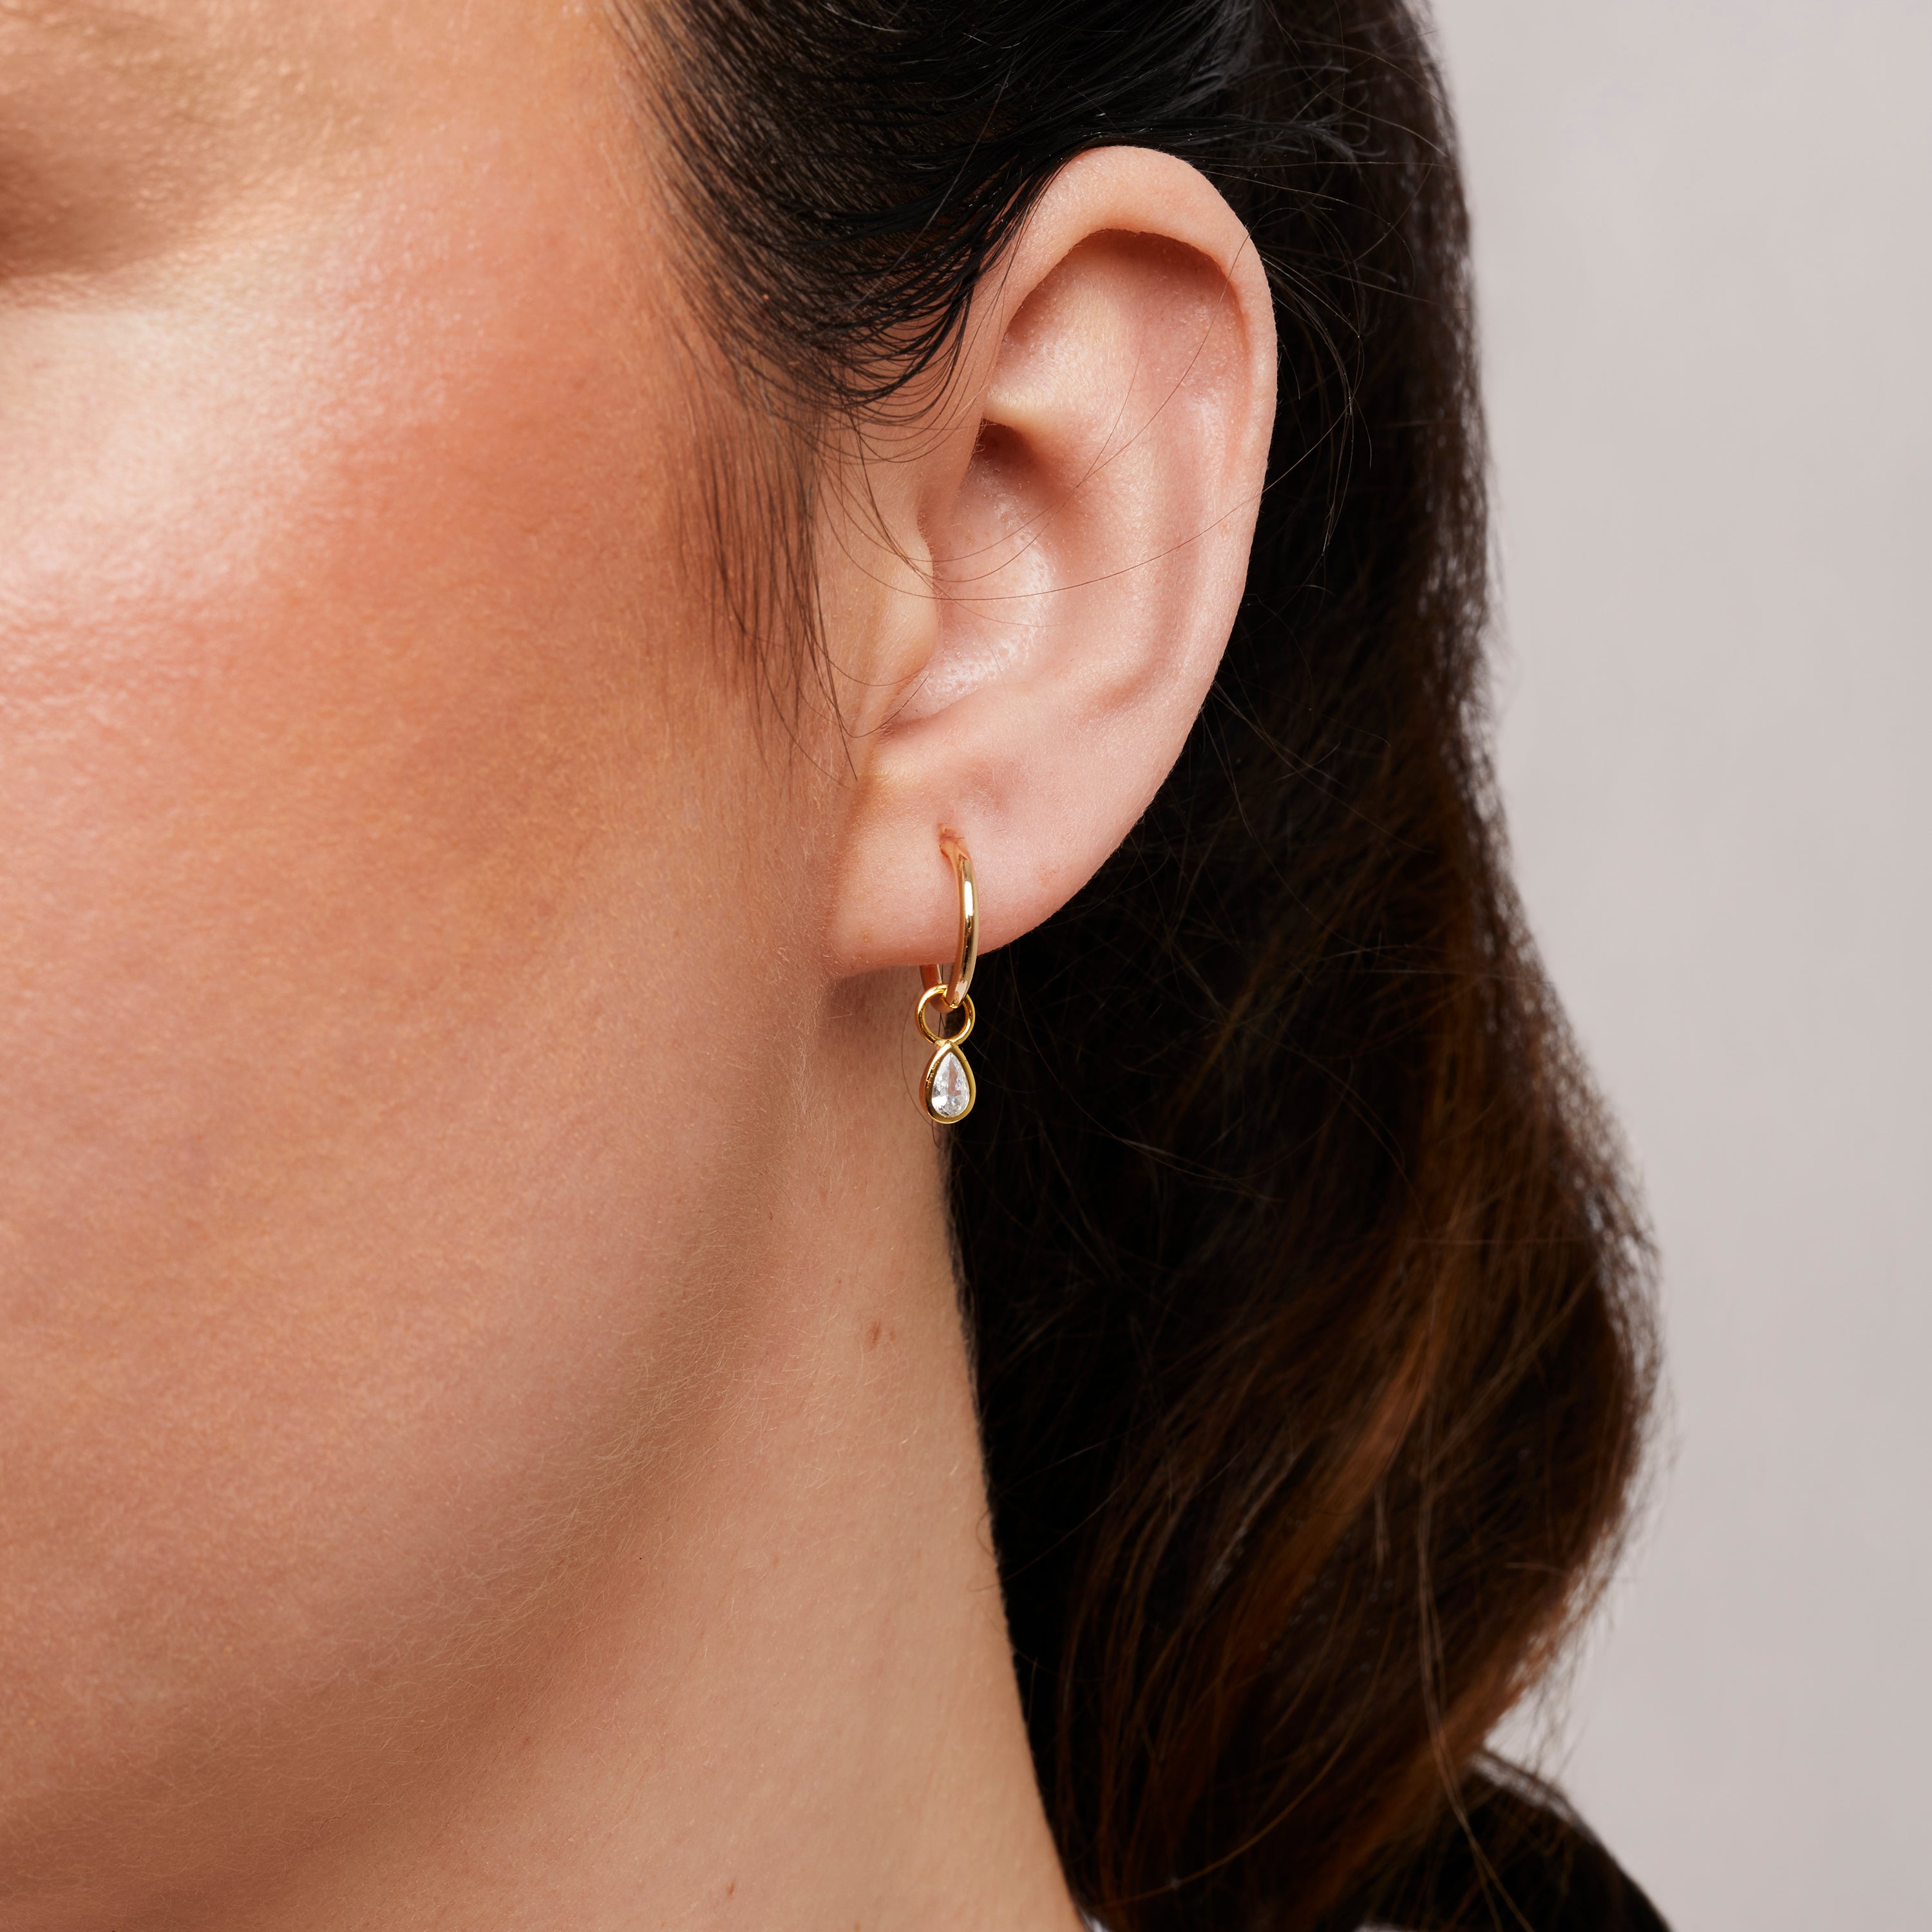 A model wearing the Teardrop Hoop Charms are made with high-quality materials, including 18K gold plating over 925 Sterling Silver. These charms are both non-tarnish and water resistant. The perfect combination of style and durability.